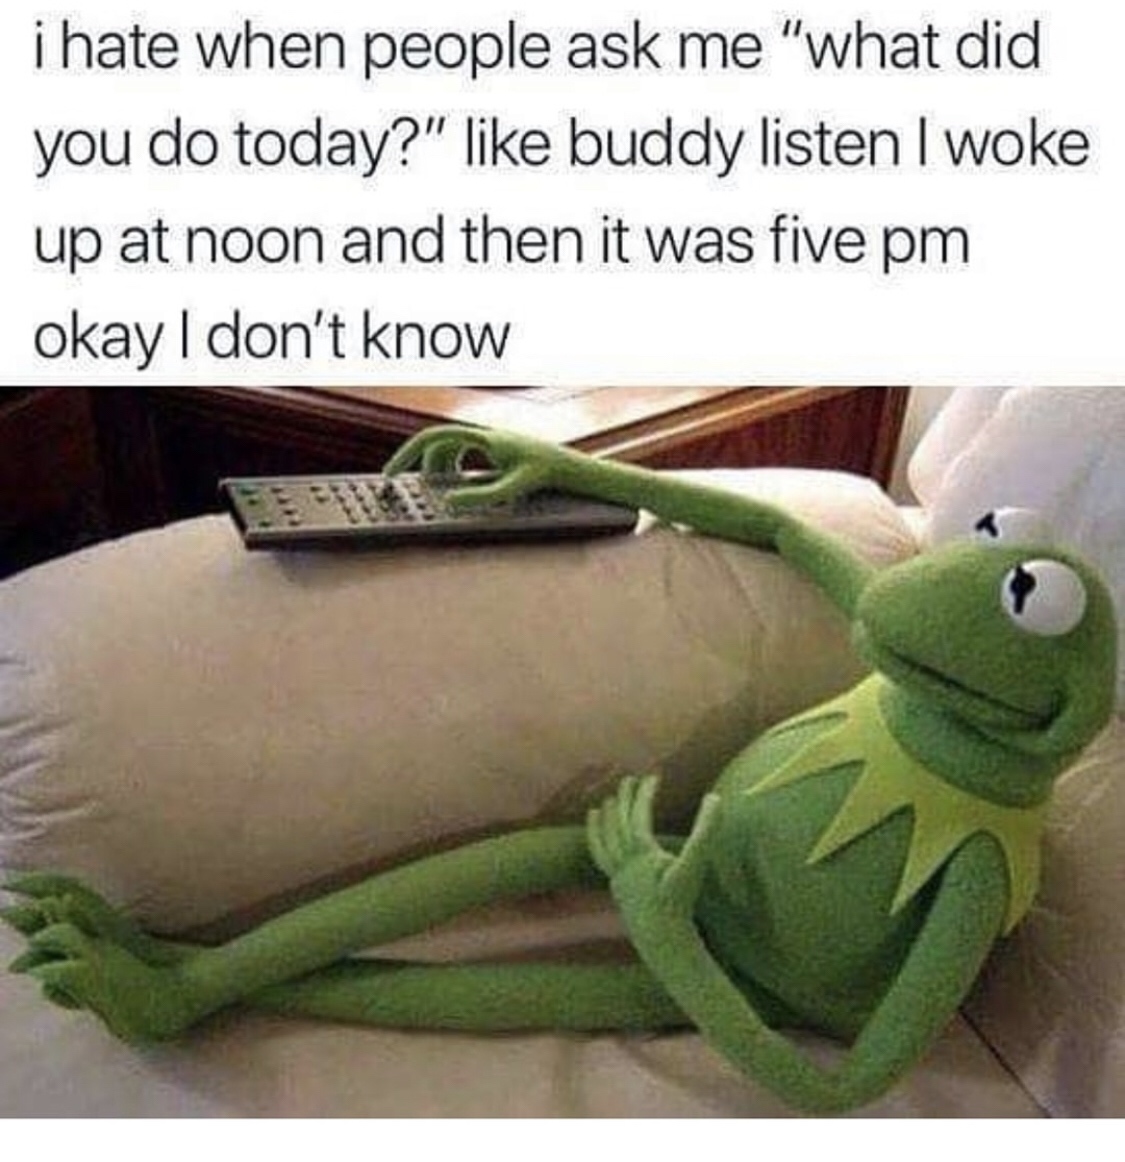 sassy kermit the frog meme - i hate when people ask me "what did you do today?" buddy listen I woke up at noon and then it was five pm okay I don't know